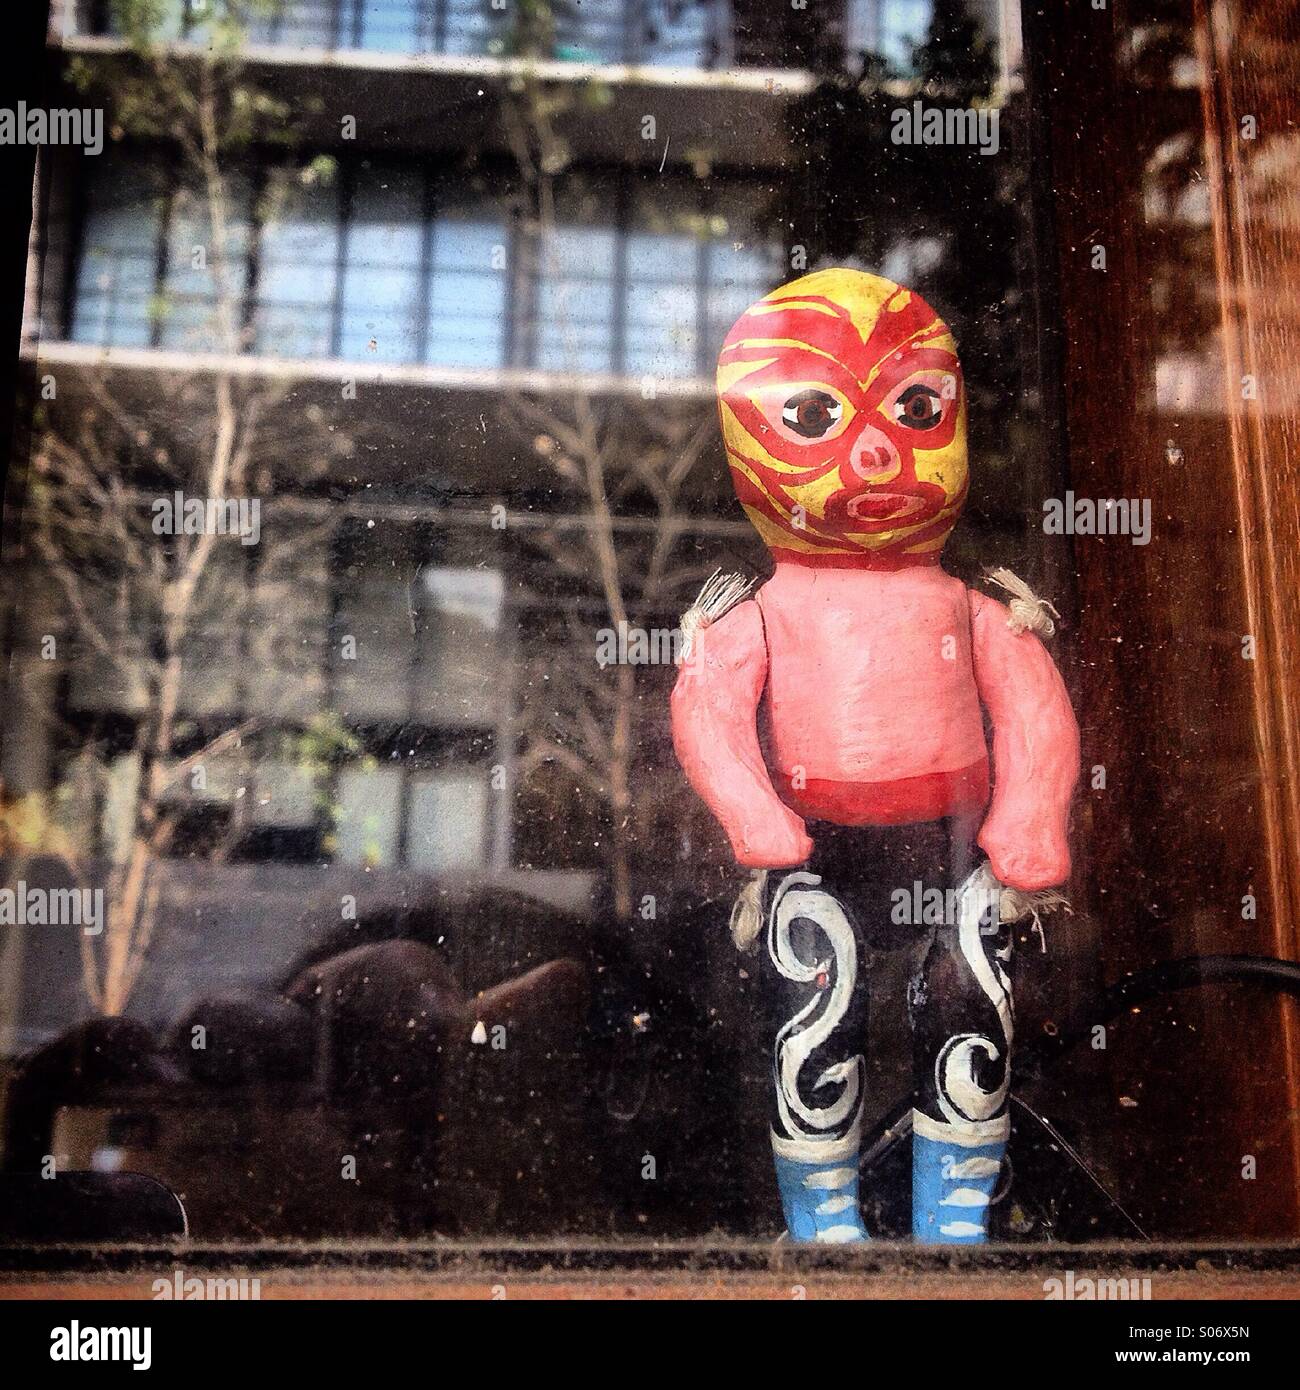 A doll of a free fight wrestler decorates a window that reflects a building in Colonia Roma, Mexico City, Mexico Stock Photo